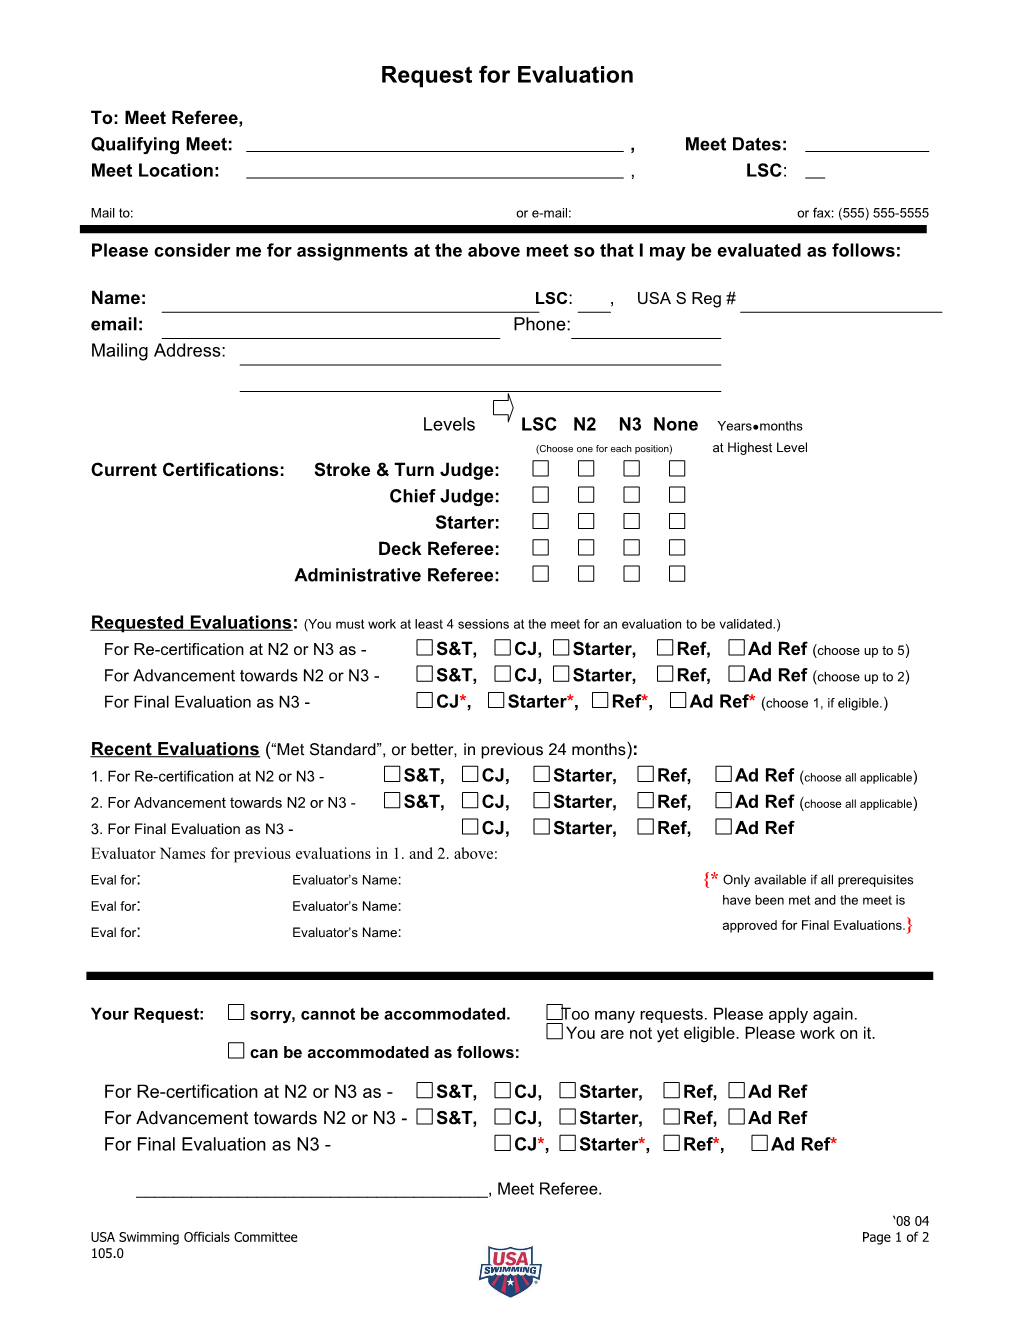 Request for Evaluation